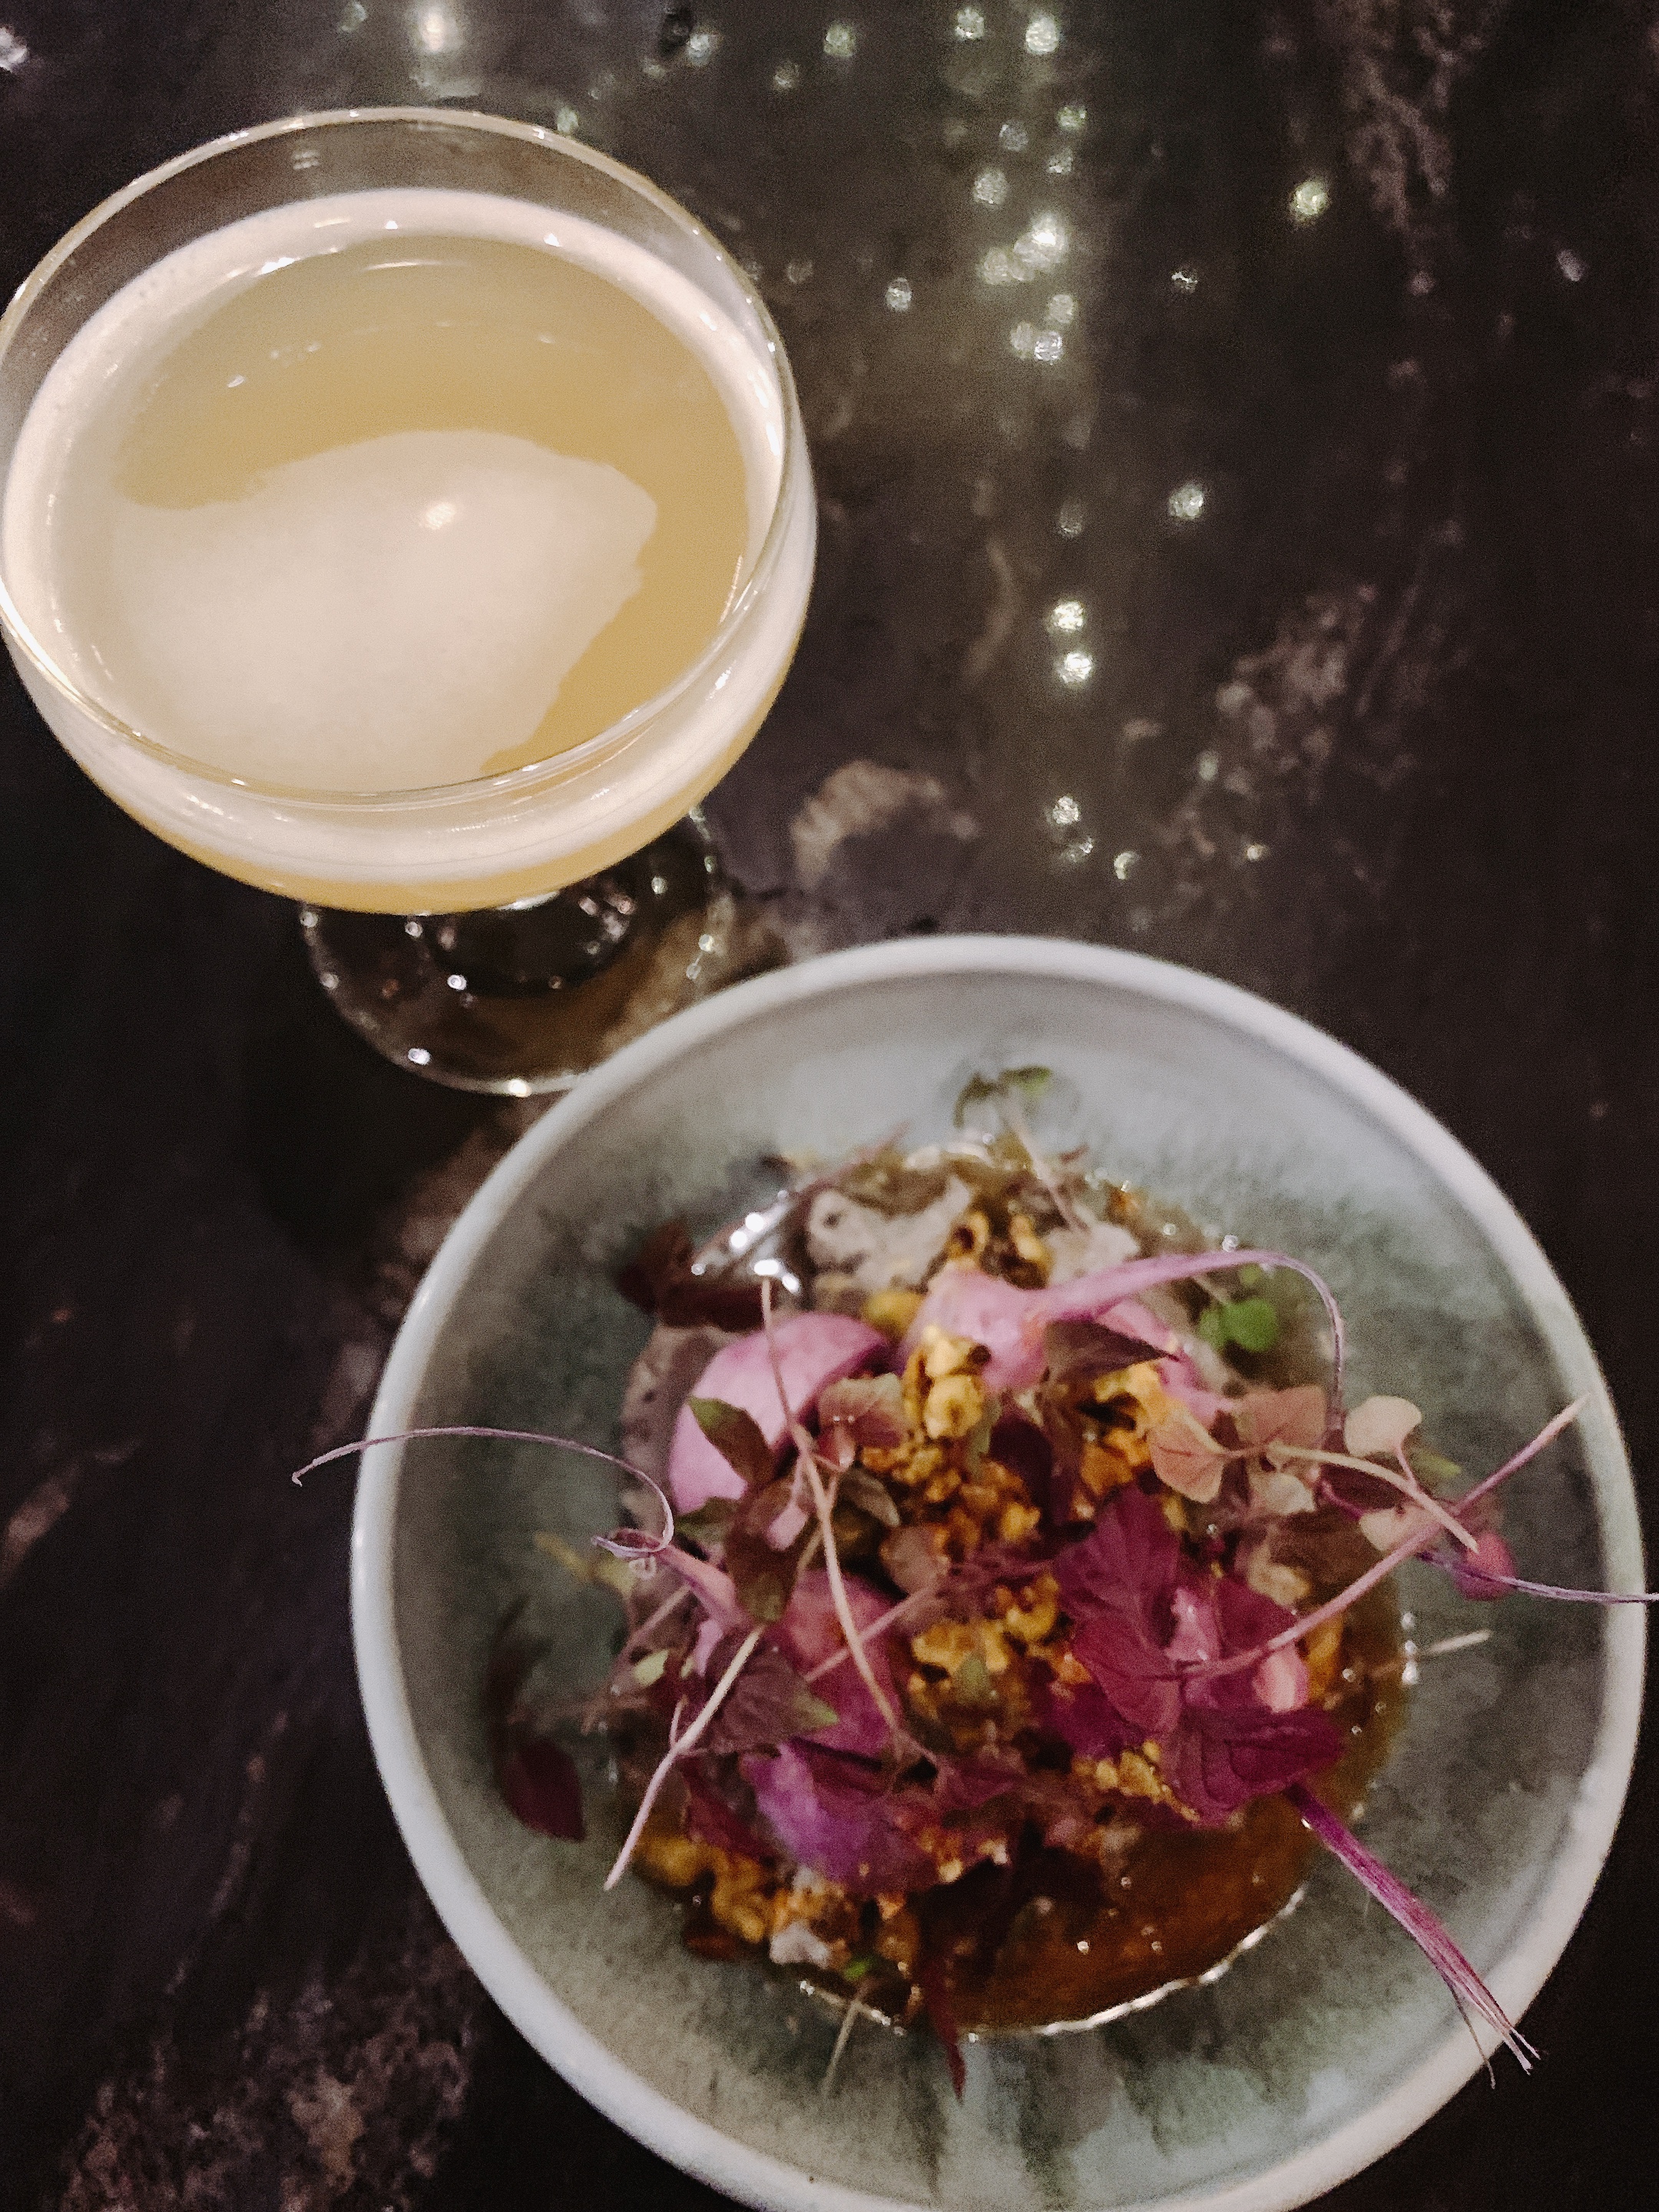 a radish dish and a cocktail